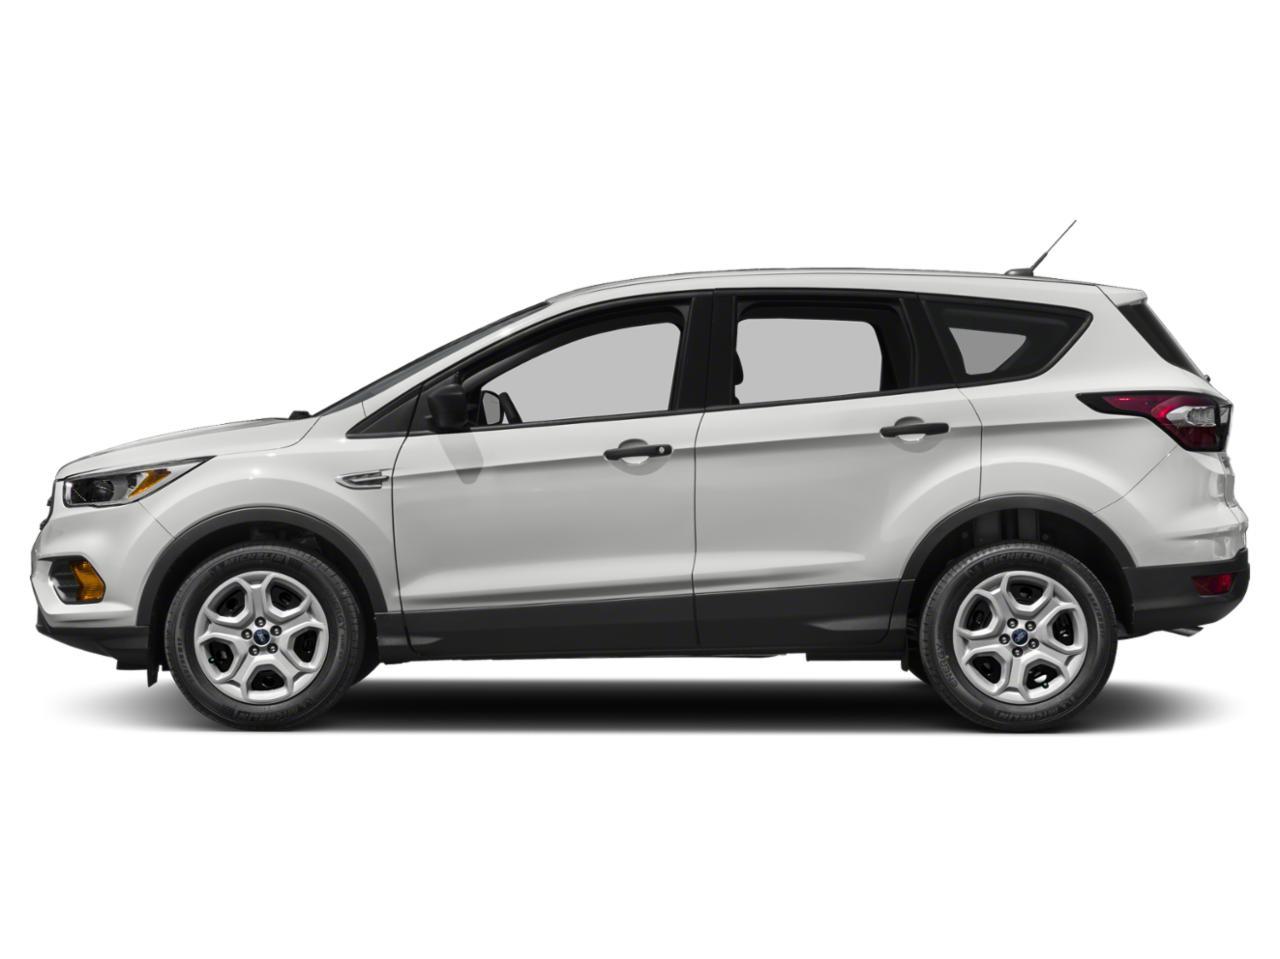 Used 2018 Ford Escape SE with VIN 1FMCU9G90JUB49122 for sale in Reidsville, NC